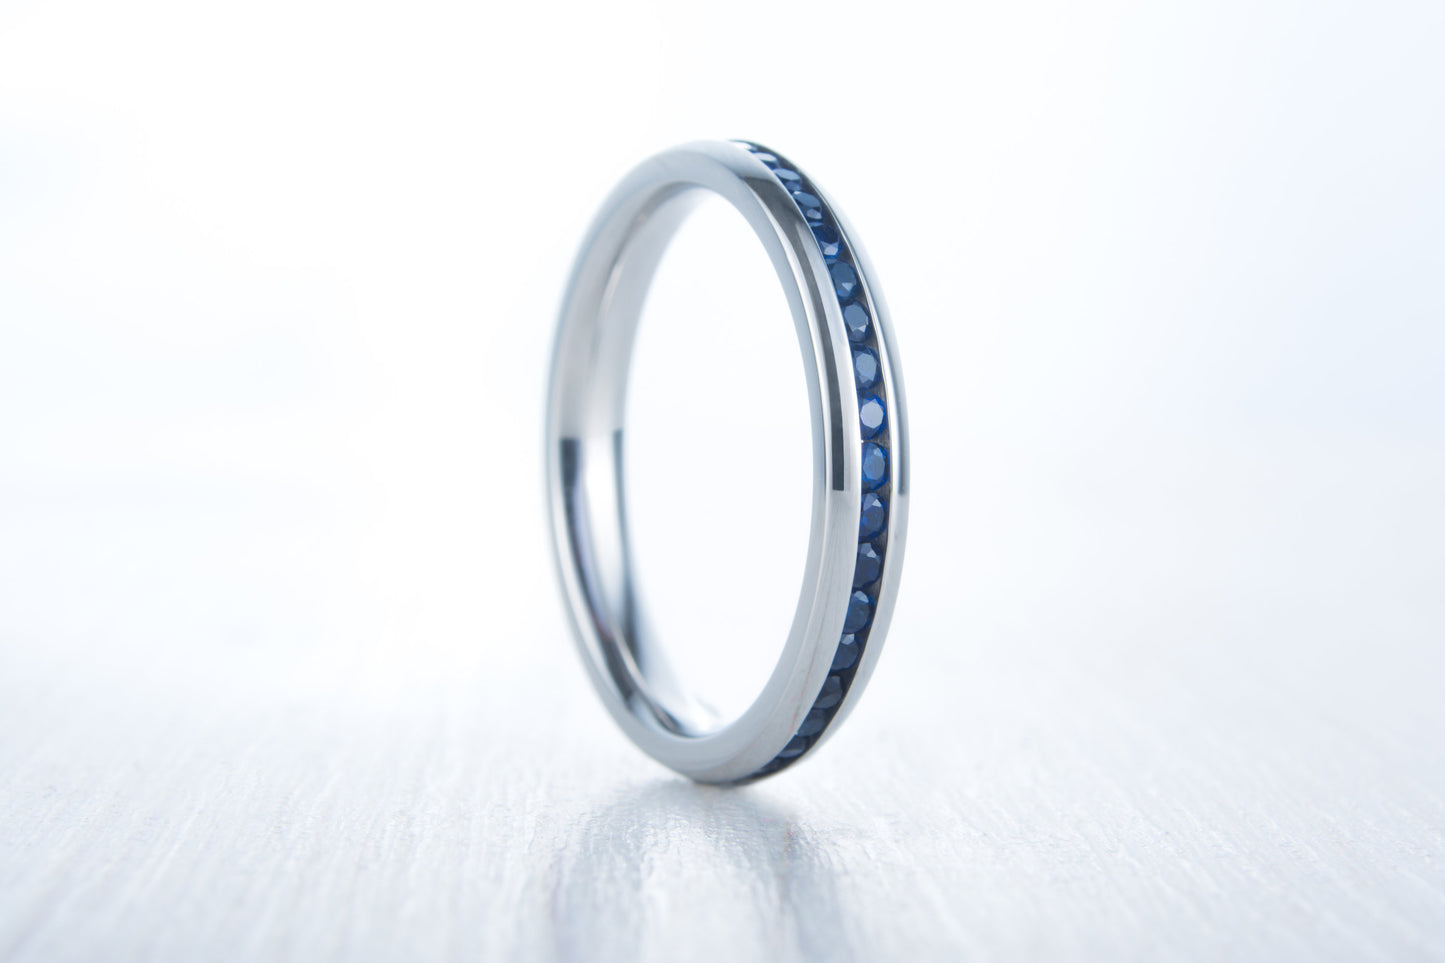 Lab blue sapphire 3mm Wide Full Eternity ring / stacking ring in white gold or titanium - Wedding Band - Engagement ring